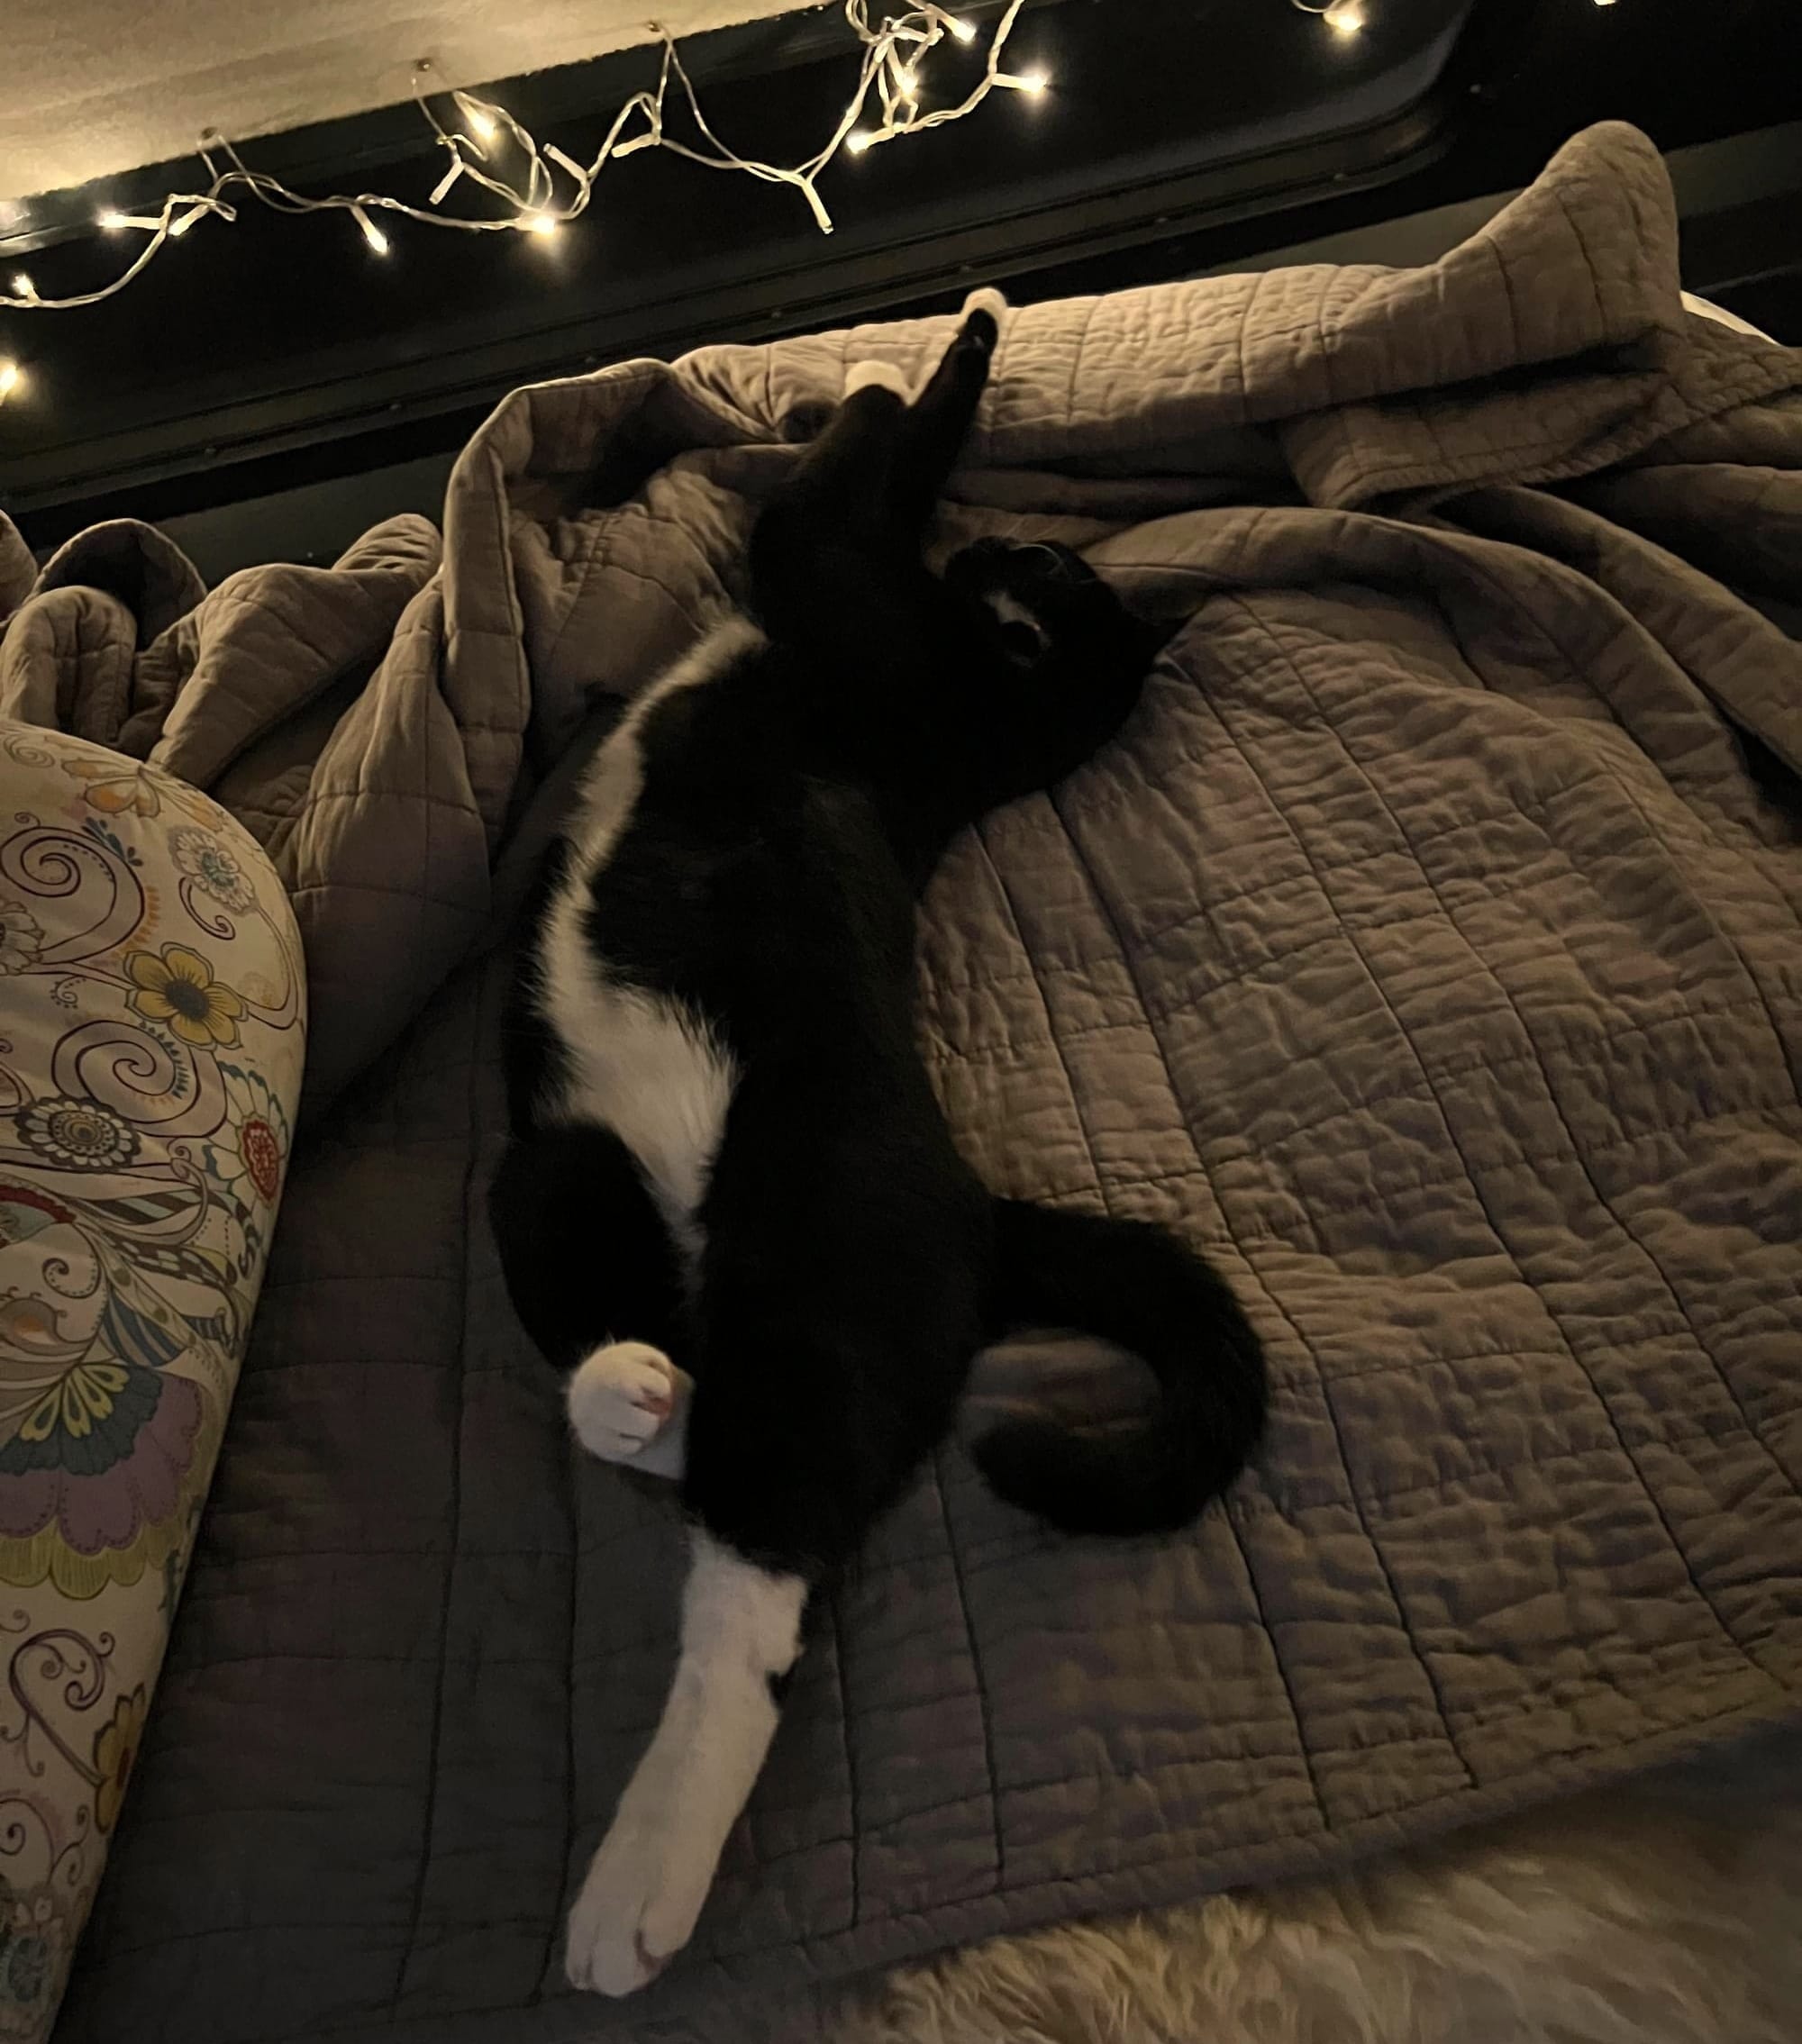 The same black and white cat lying stretched out on his side with his arms over his head, against a grey blanket, white fairy lights on the window above him.